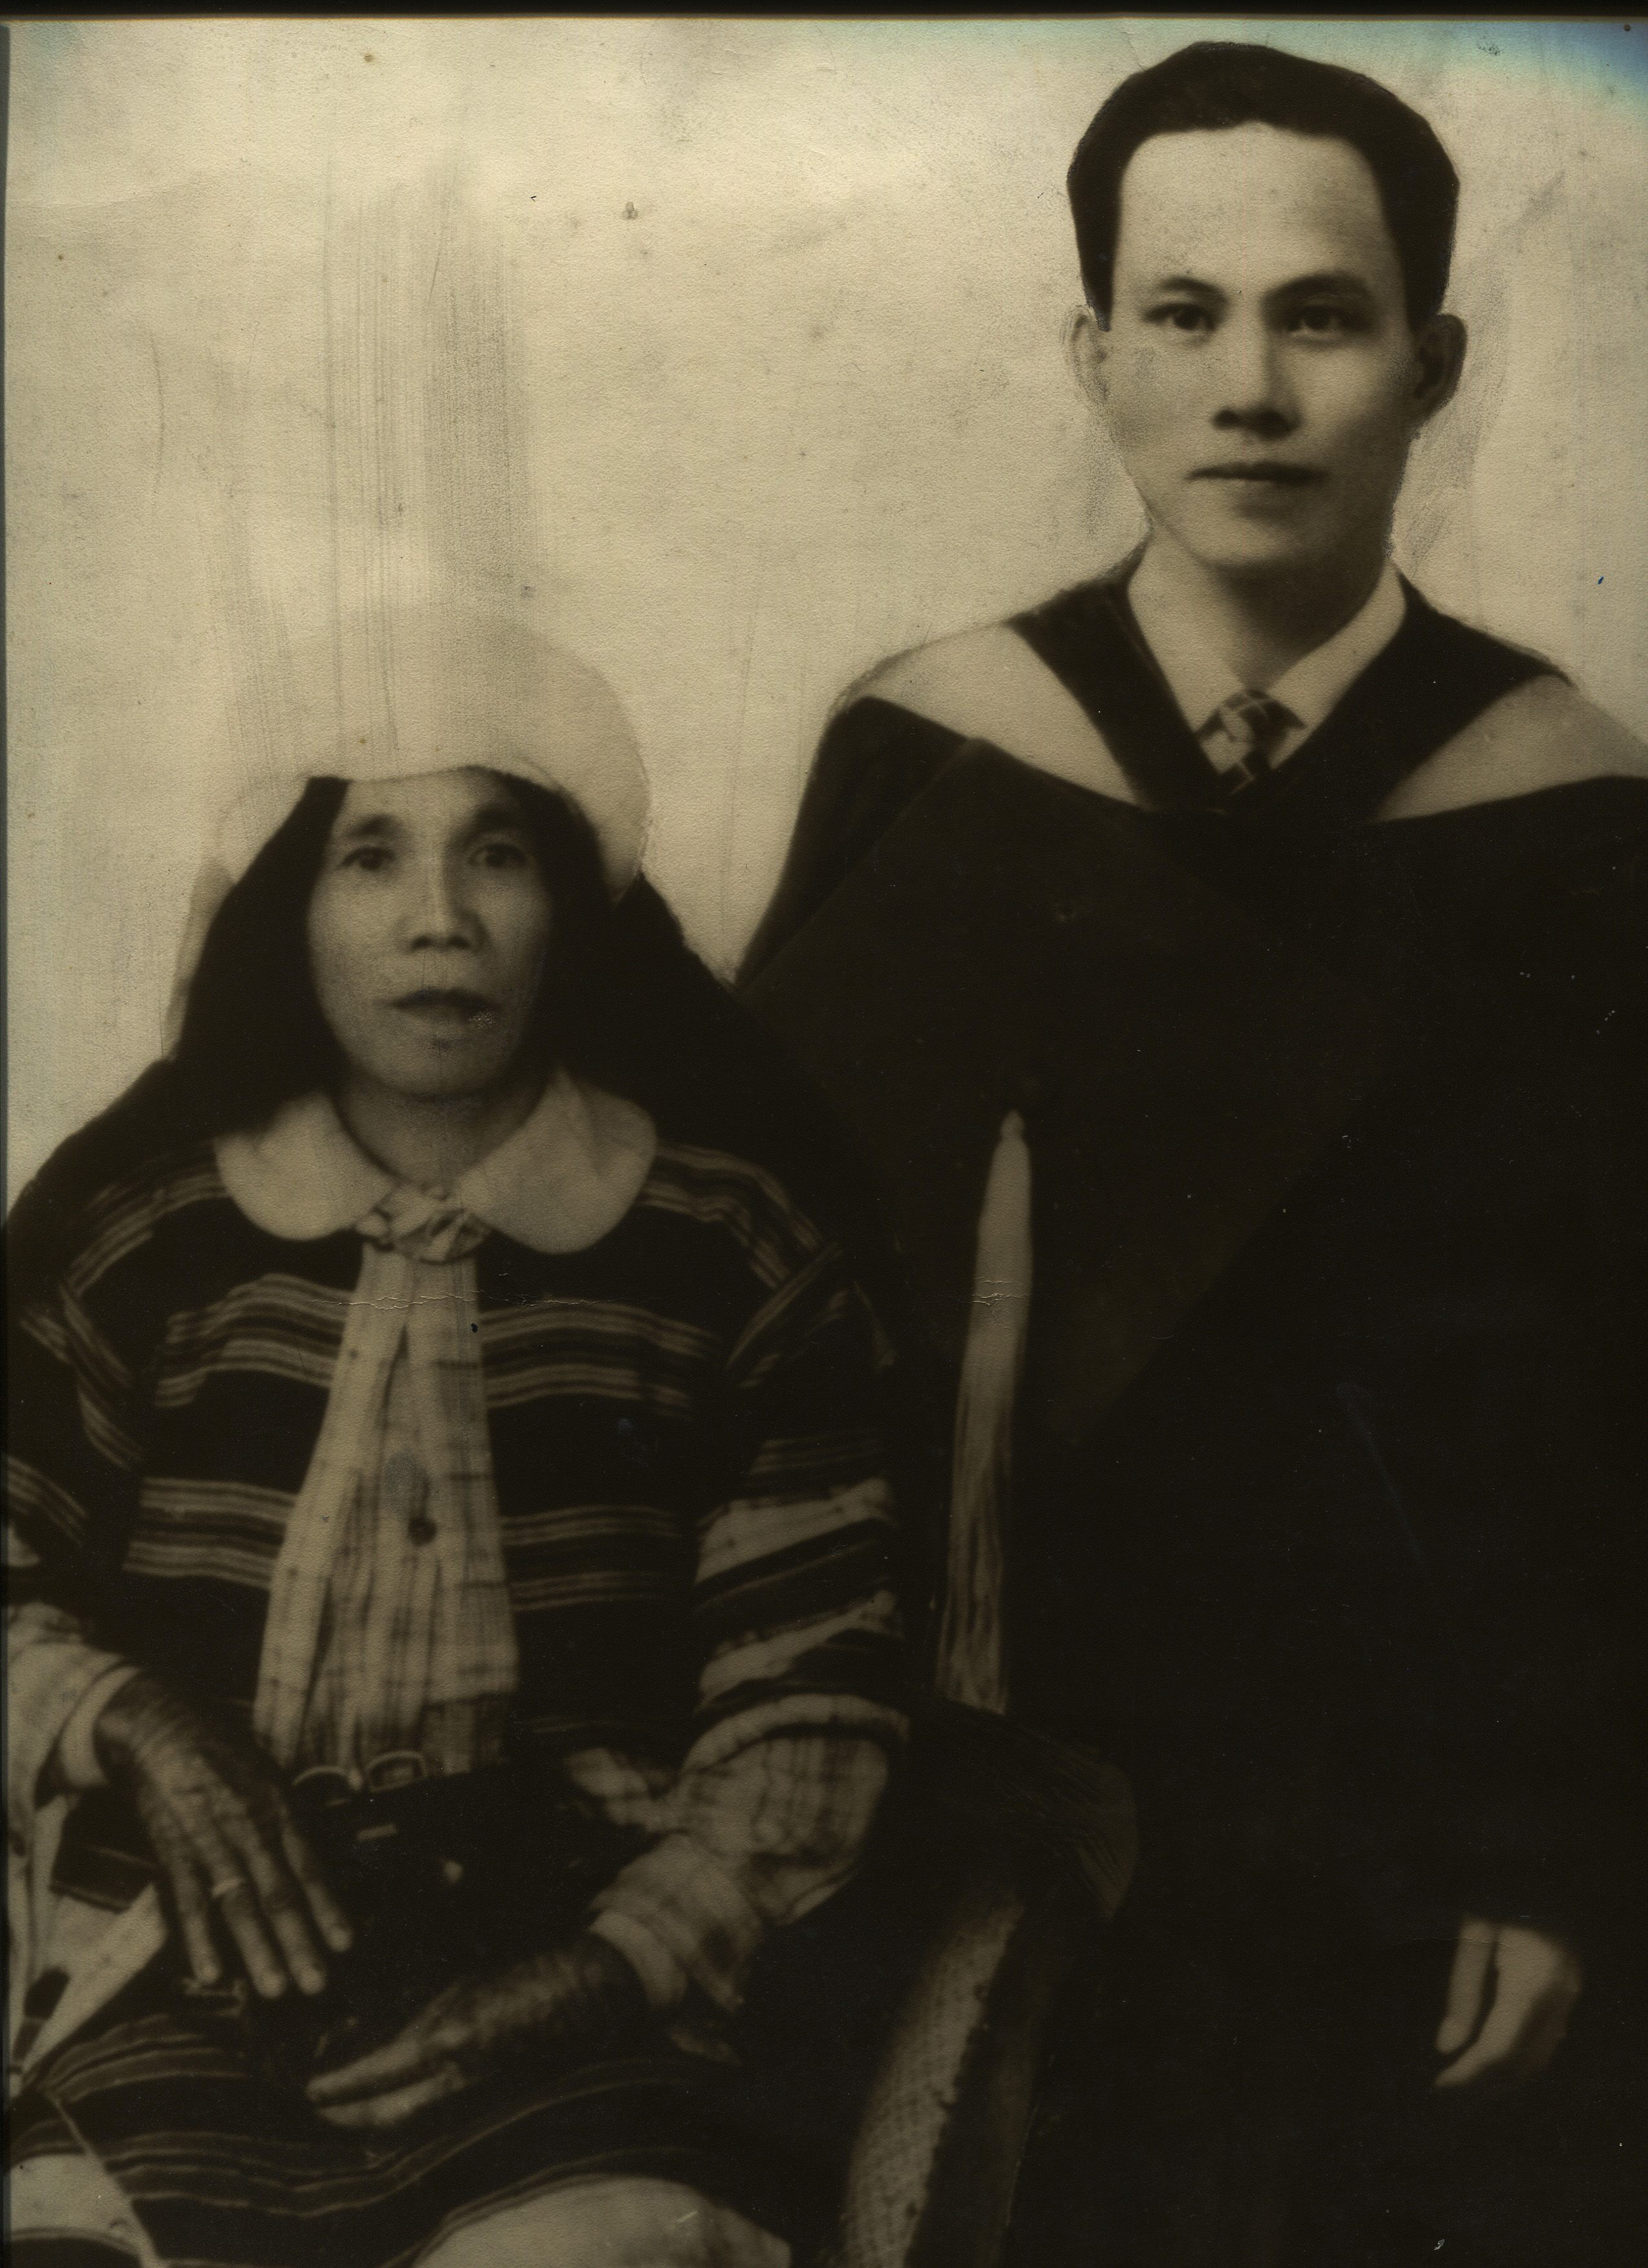 Carol Lamen's great-grandmother, Gloria Dickman, and her grandfather (Gloria's son) Kenny. Taken in Baguio, Philippines, while Kenny was in law school. He later joined the army and died in the Bataan Death March. 

Any views, findings, conclusions, or recommendations expressed in this story do not necessarily represent those of the National Endowment for the Humanities. (c) Field Museum of Natural History - CC BY-NC 4.0